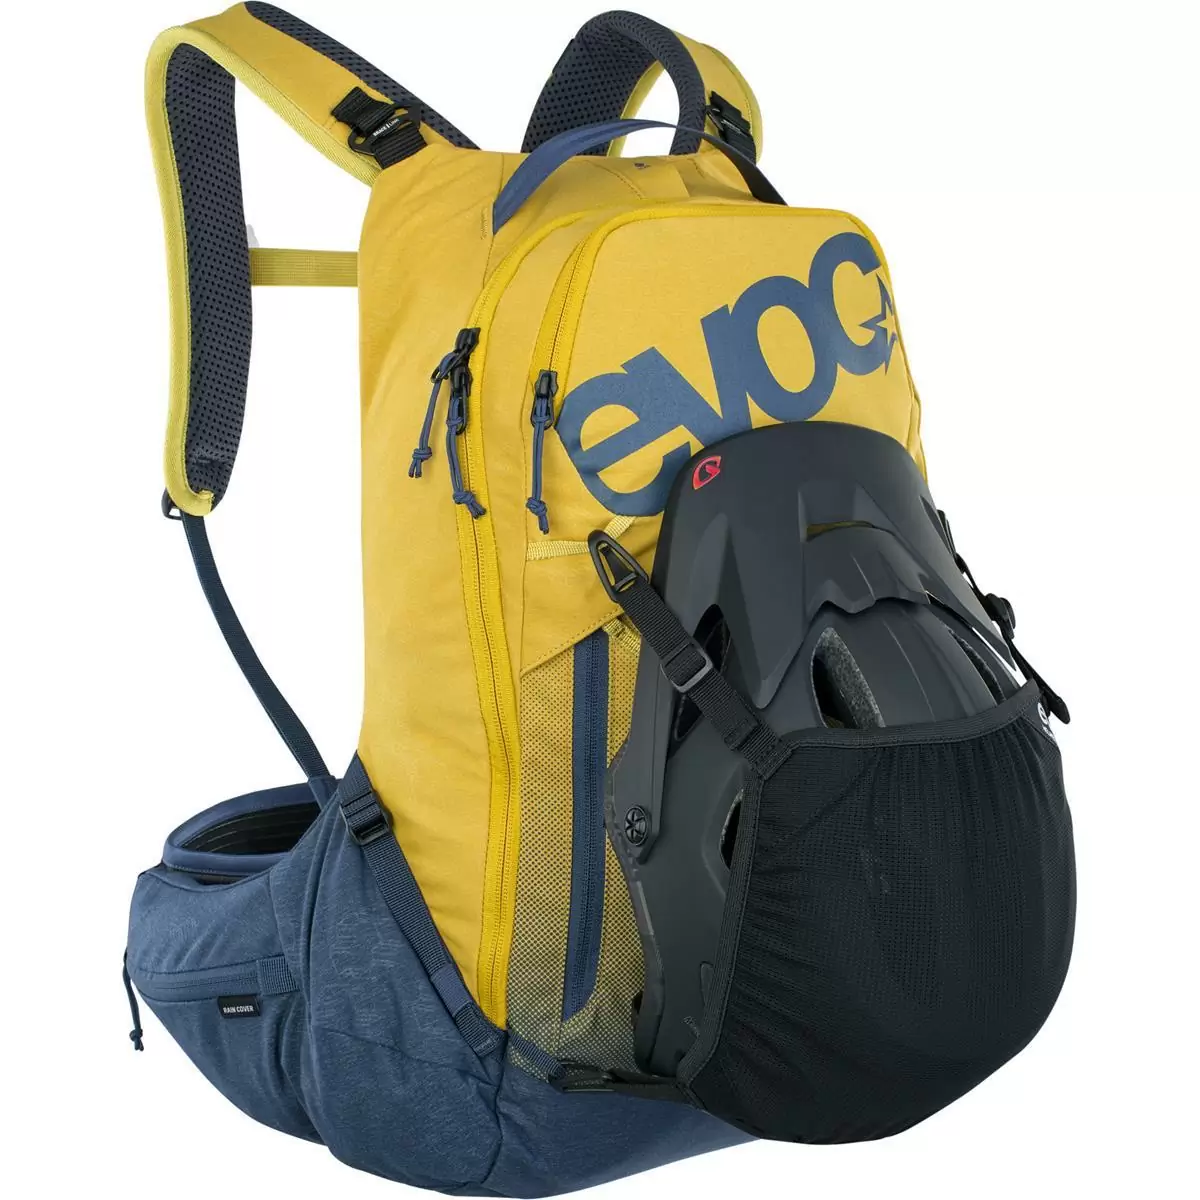 Trail Pro backpack 16 liters Curry – Denim with back protector size S/M #5